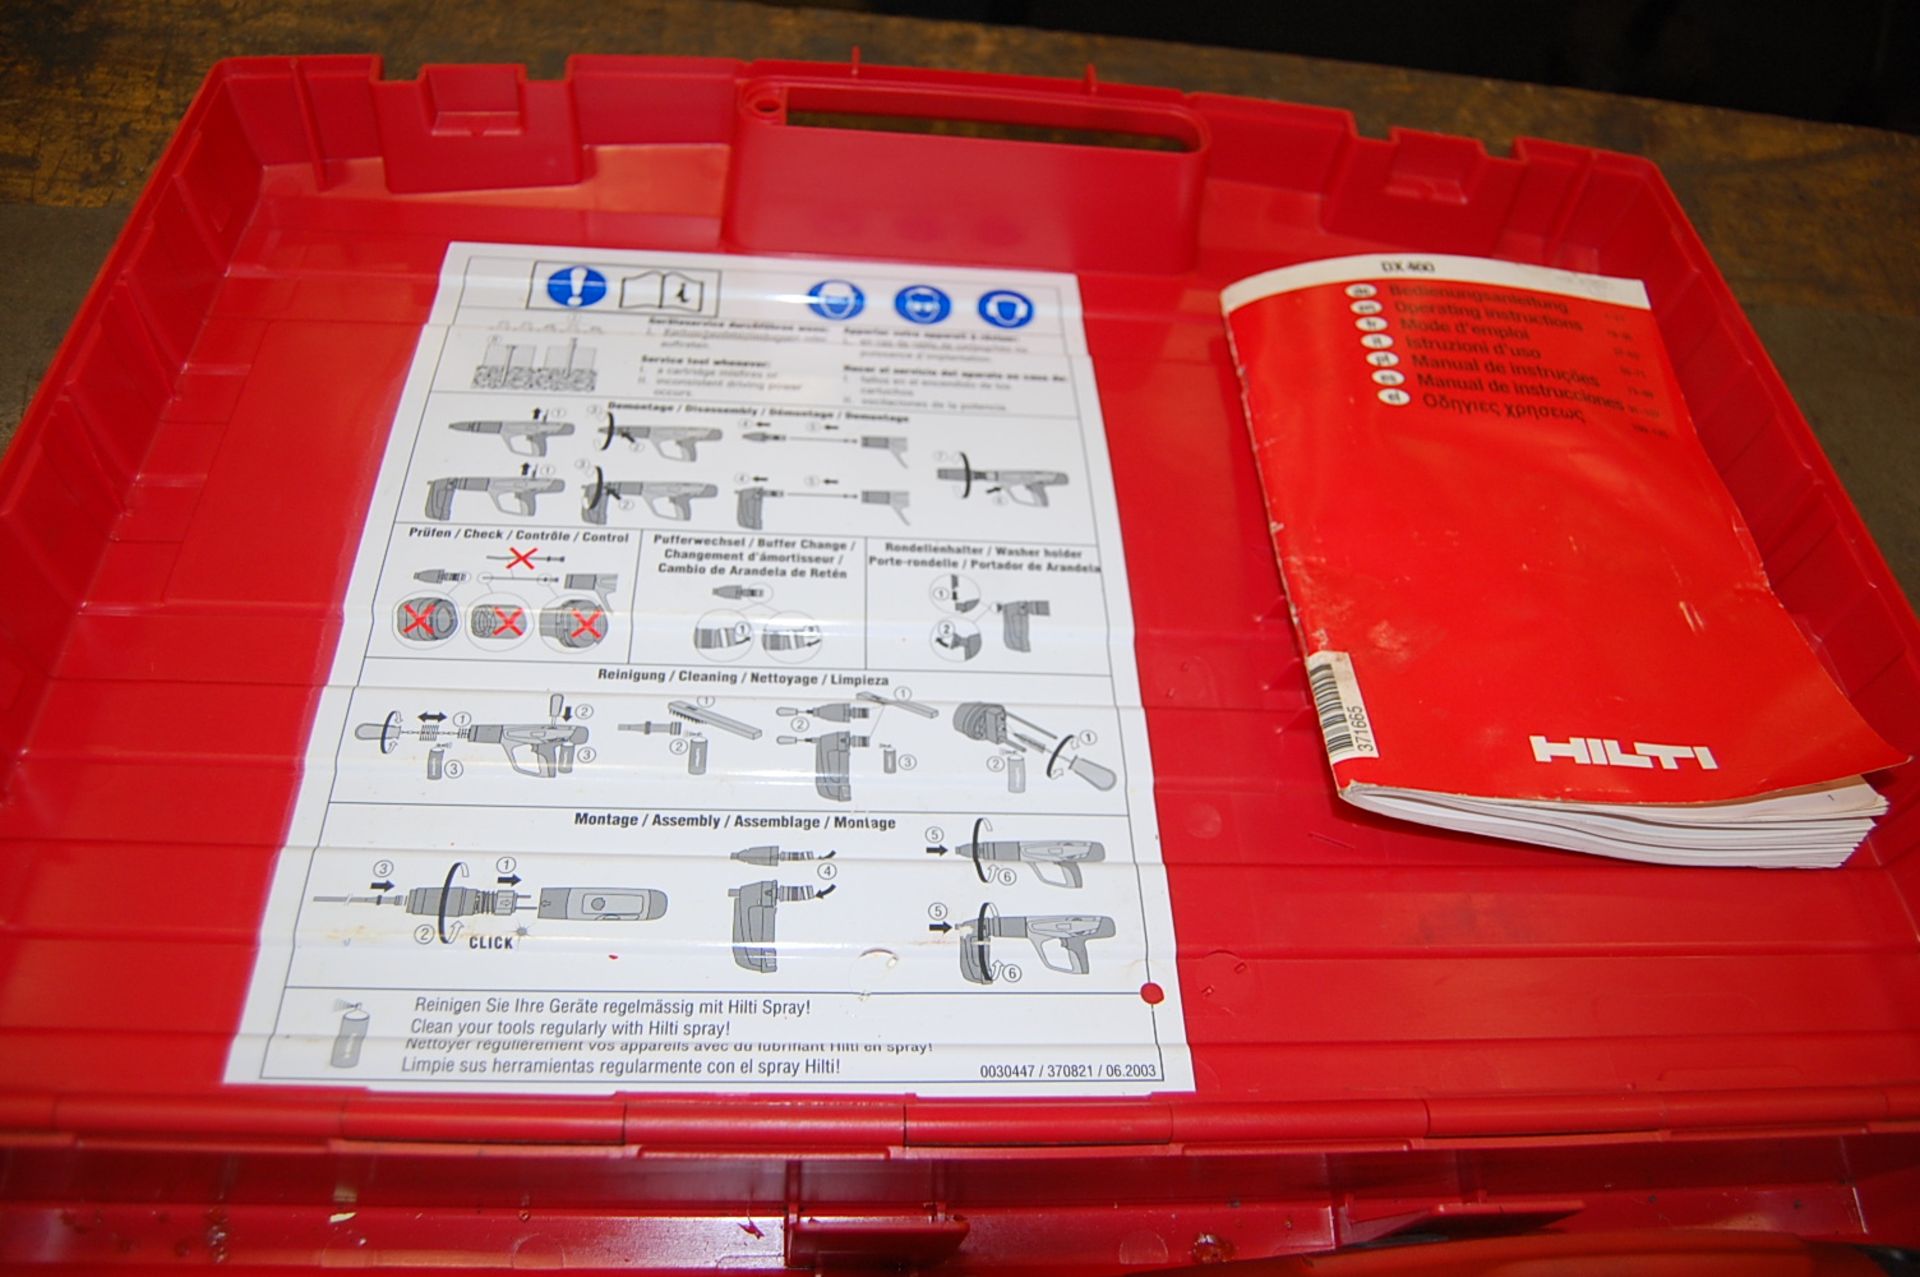 Hilti Model DX-460 Power Actuated Fastening System - Image 2 of 8